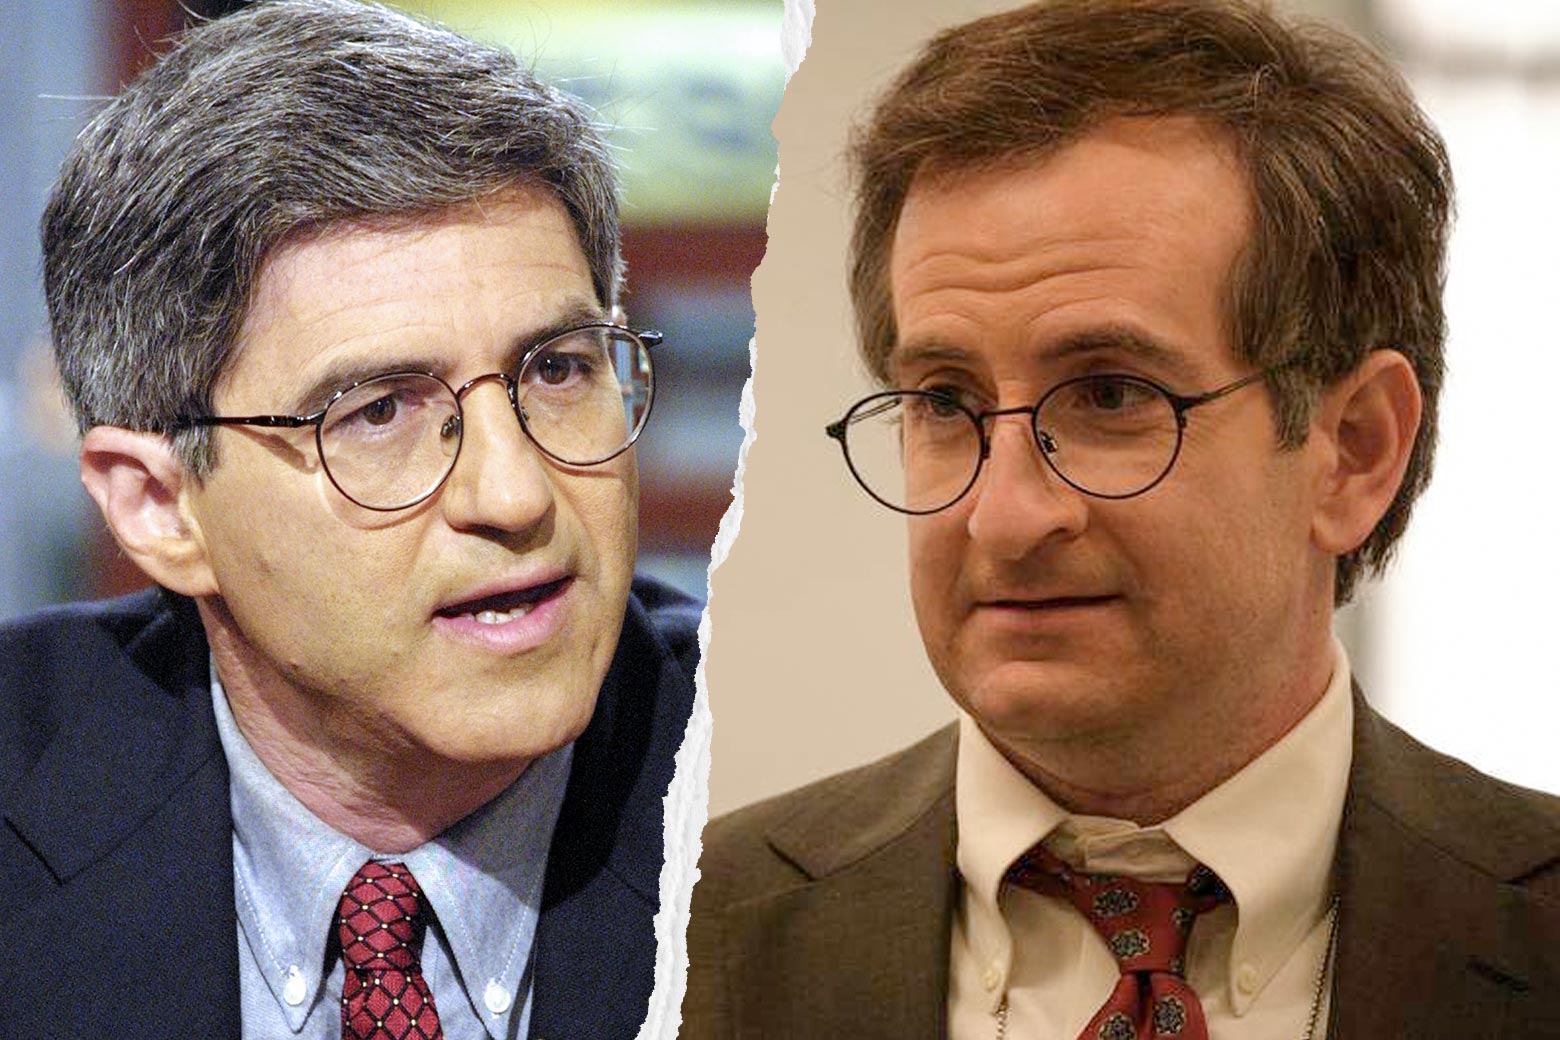 Michael Isikoff, and Danny Jacobs as Michael Isikoff in Impeachment: American Crime Story.